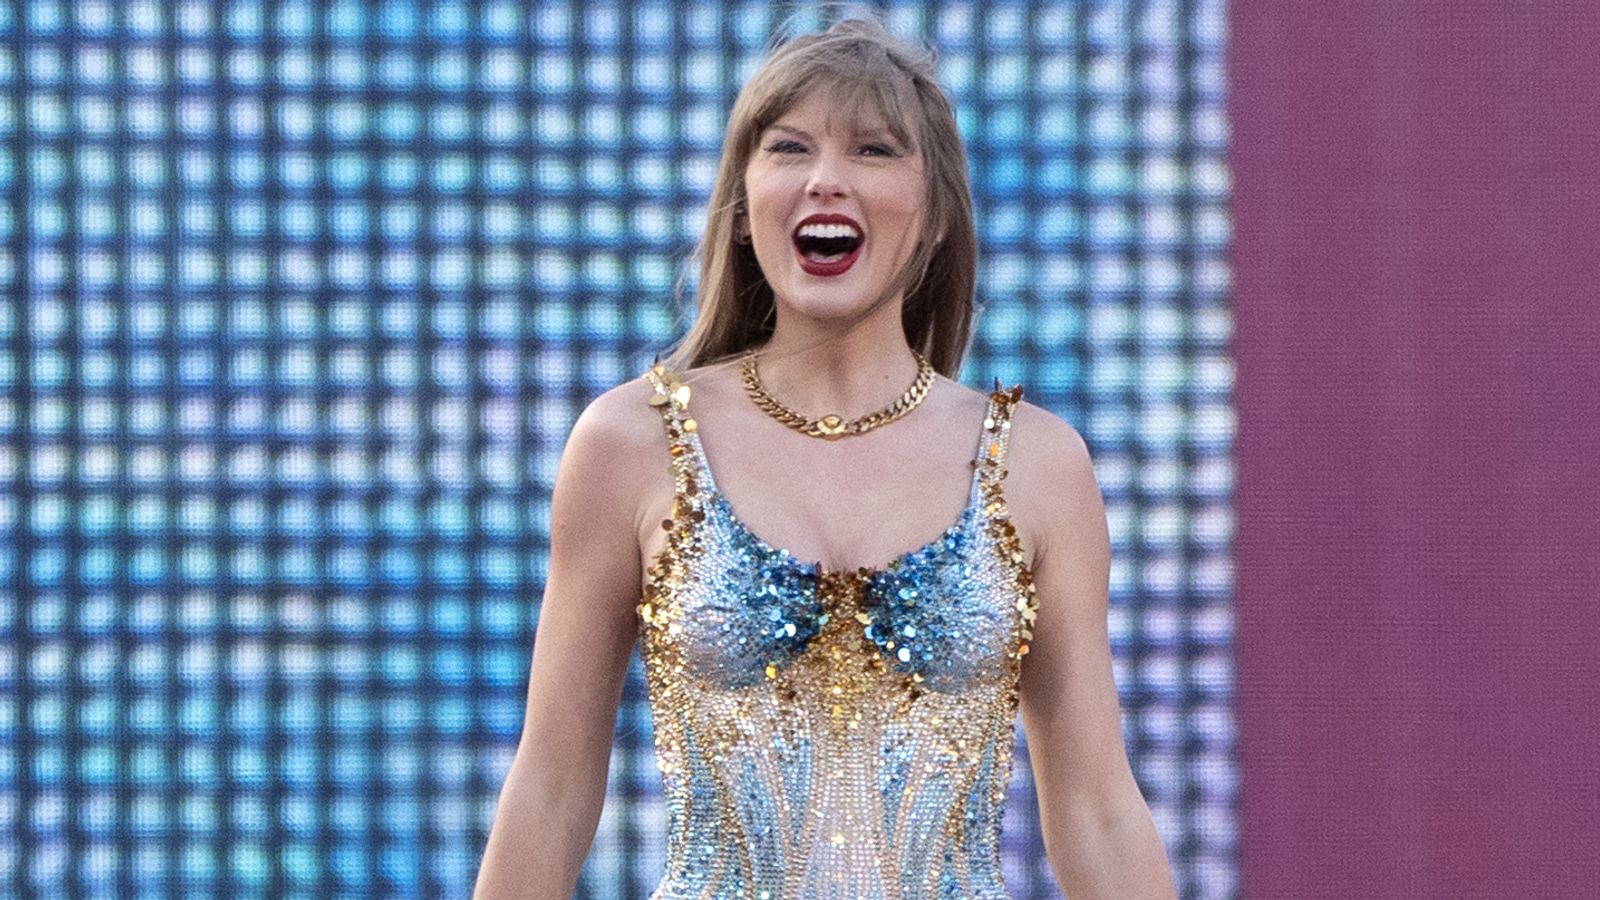 Taylor Swift travel warning issued for Cardiff ahead of Eras Tour performance